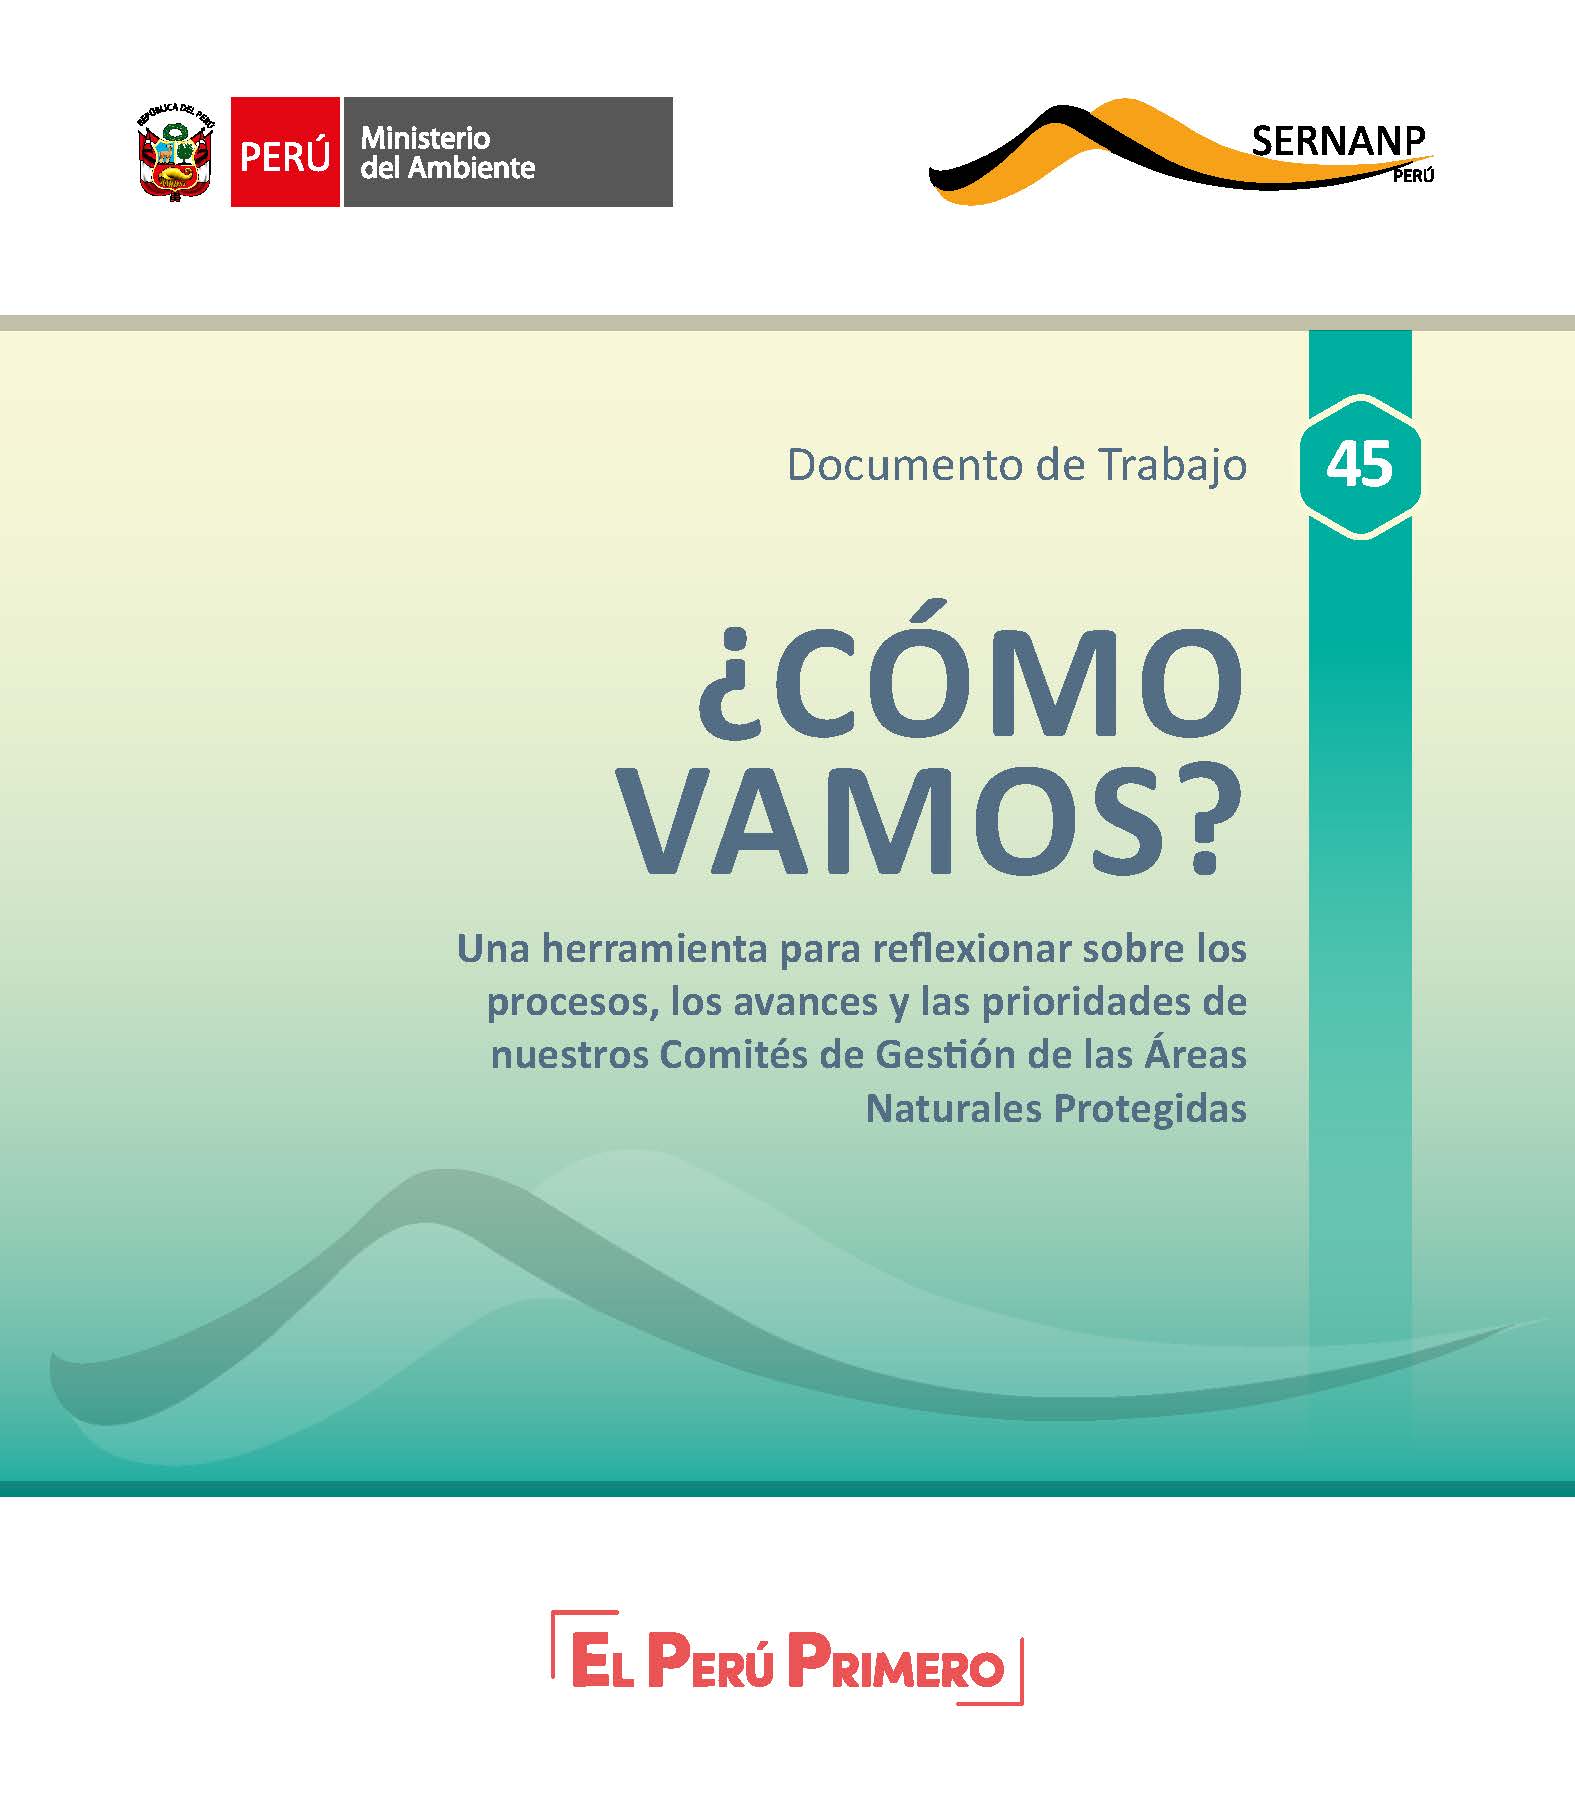 ¿Cómo vamos? (How are we doing?) was adopted as one of Peru's official documents and plans for annual implementation of multi-stakeholder trainings in 75 protected areas.